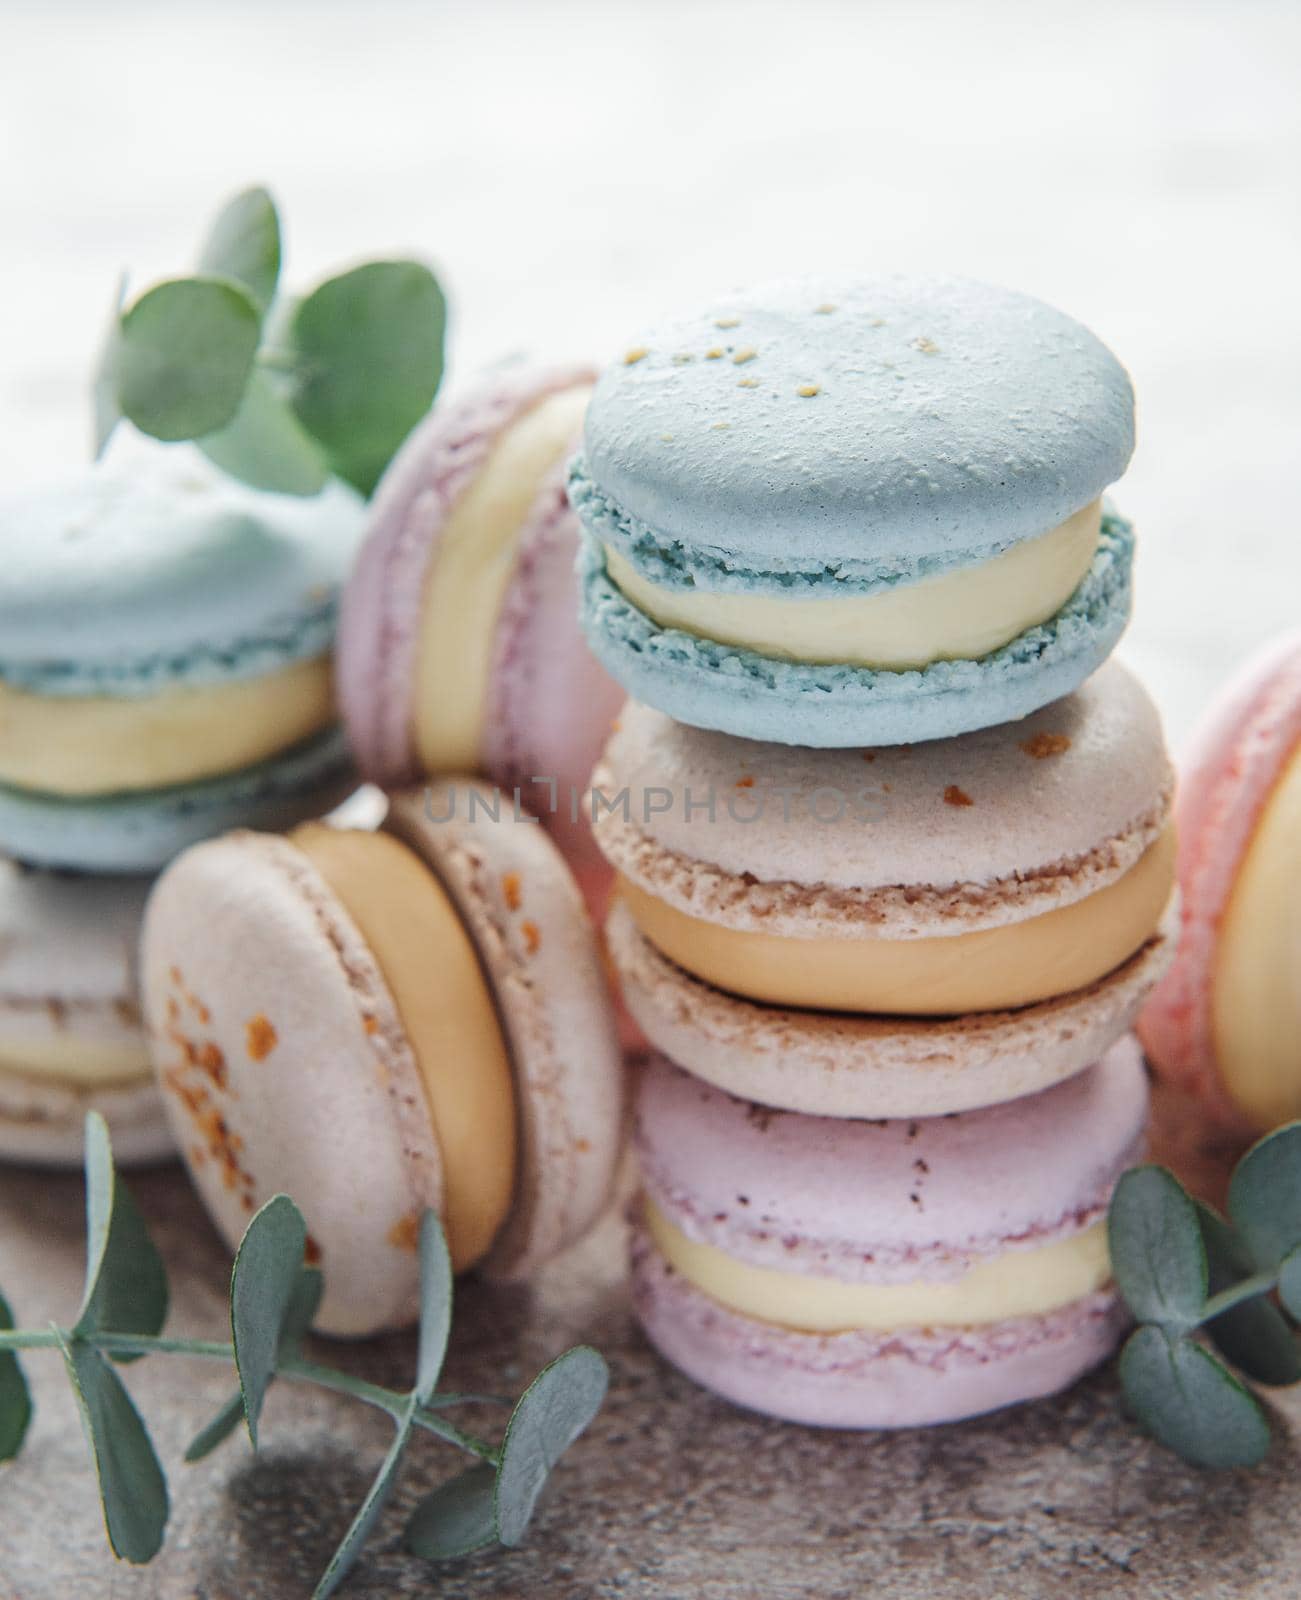 Beautiful colorful tasty macaroons on a concrete background by Almaje